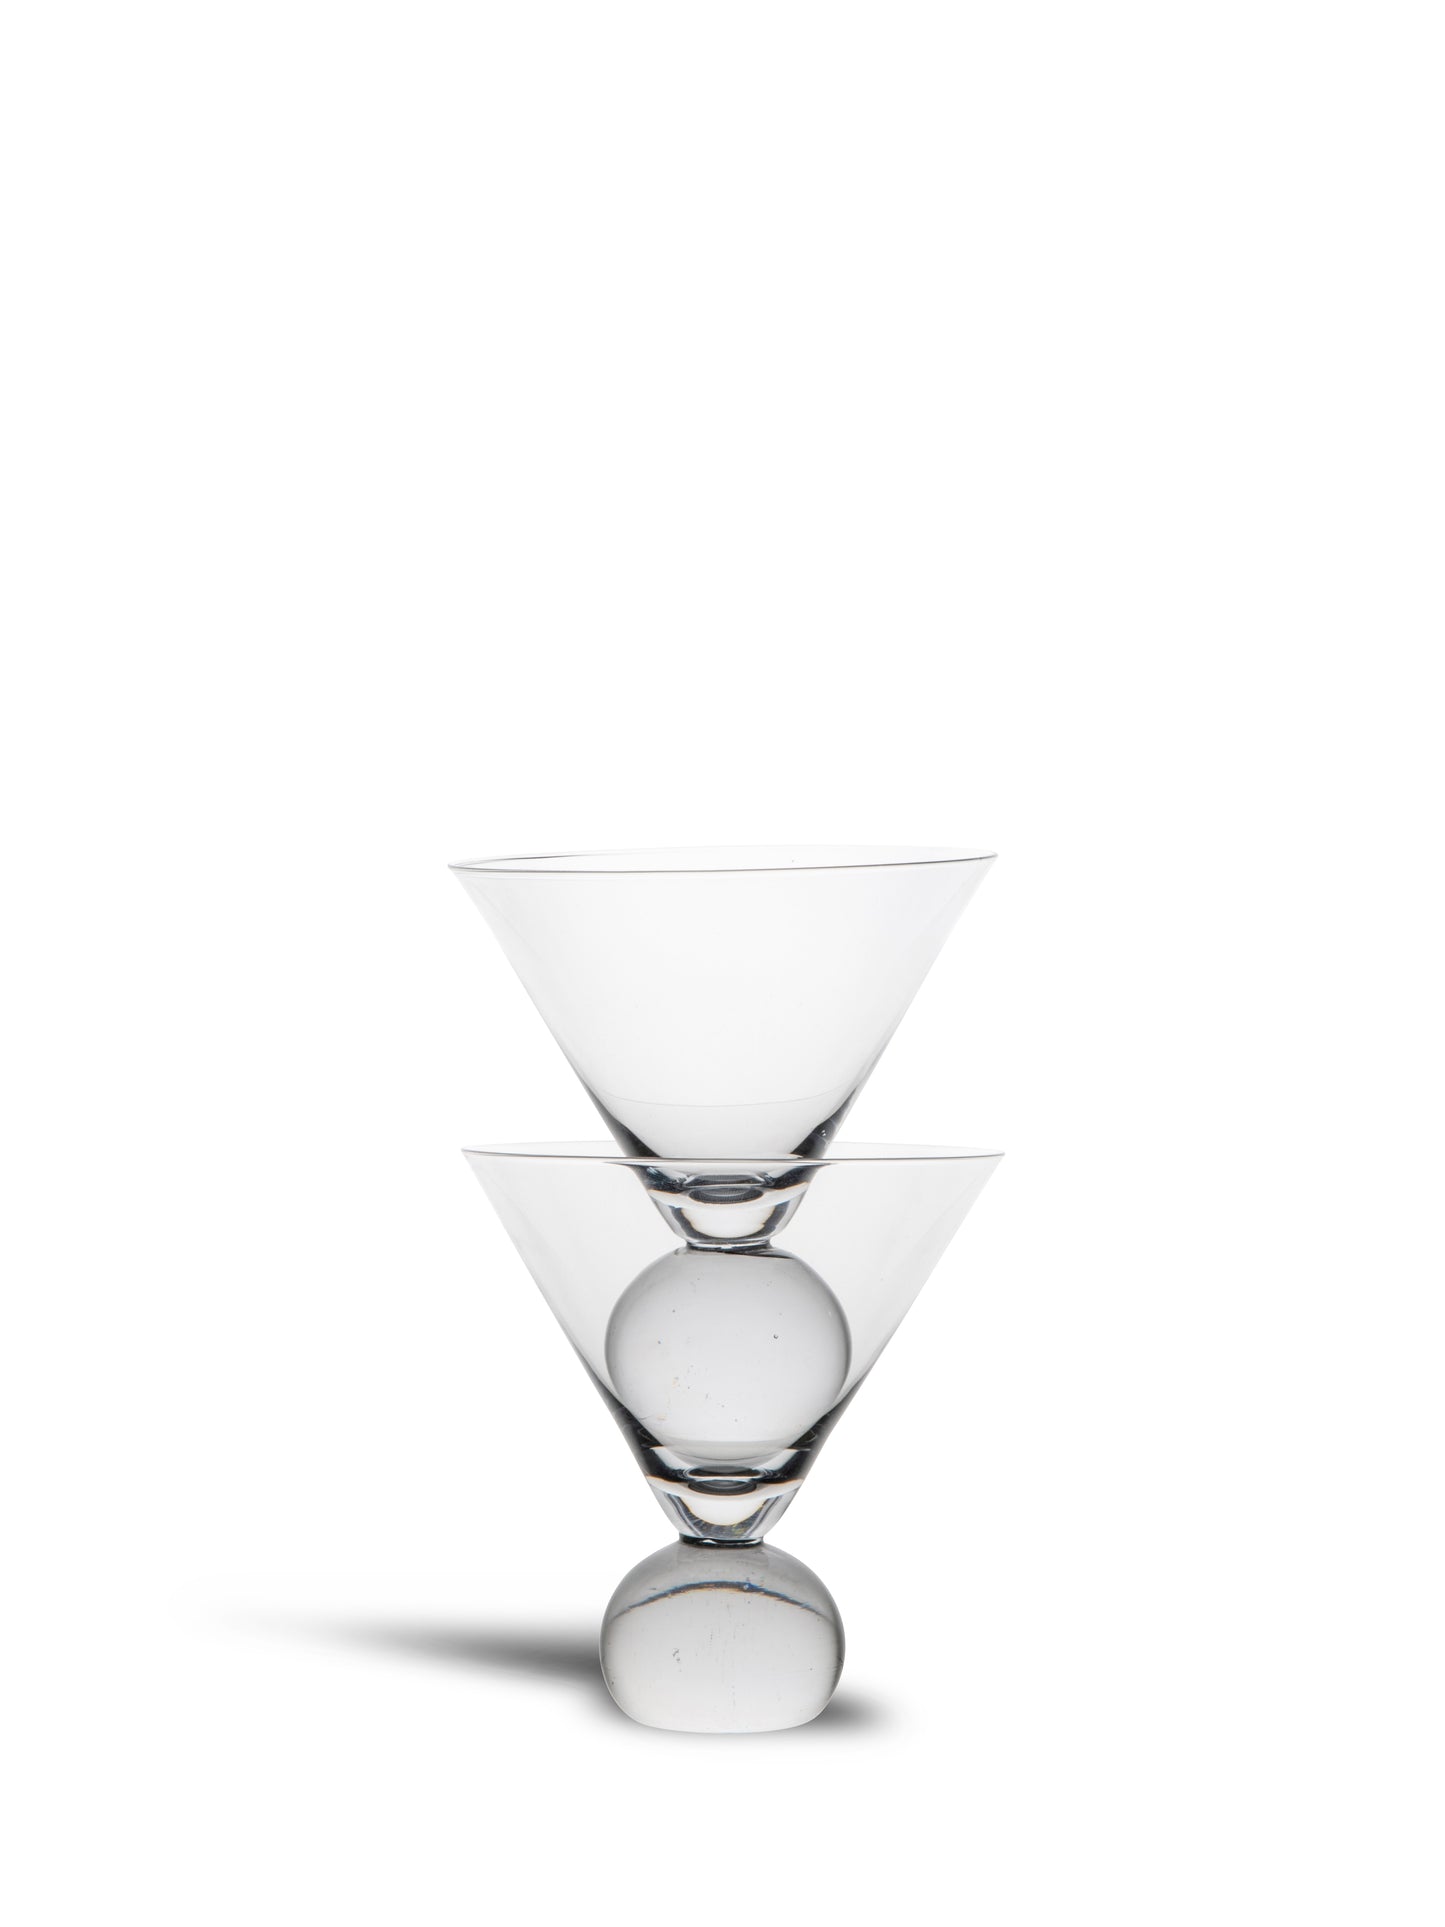 Byon by Widgeteer Spice Glasses, Ball-Stem Martini Glass Set of Two